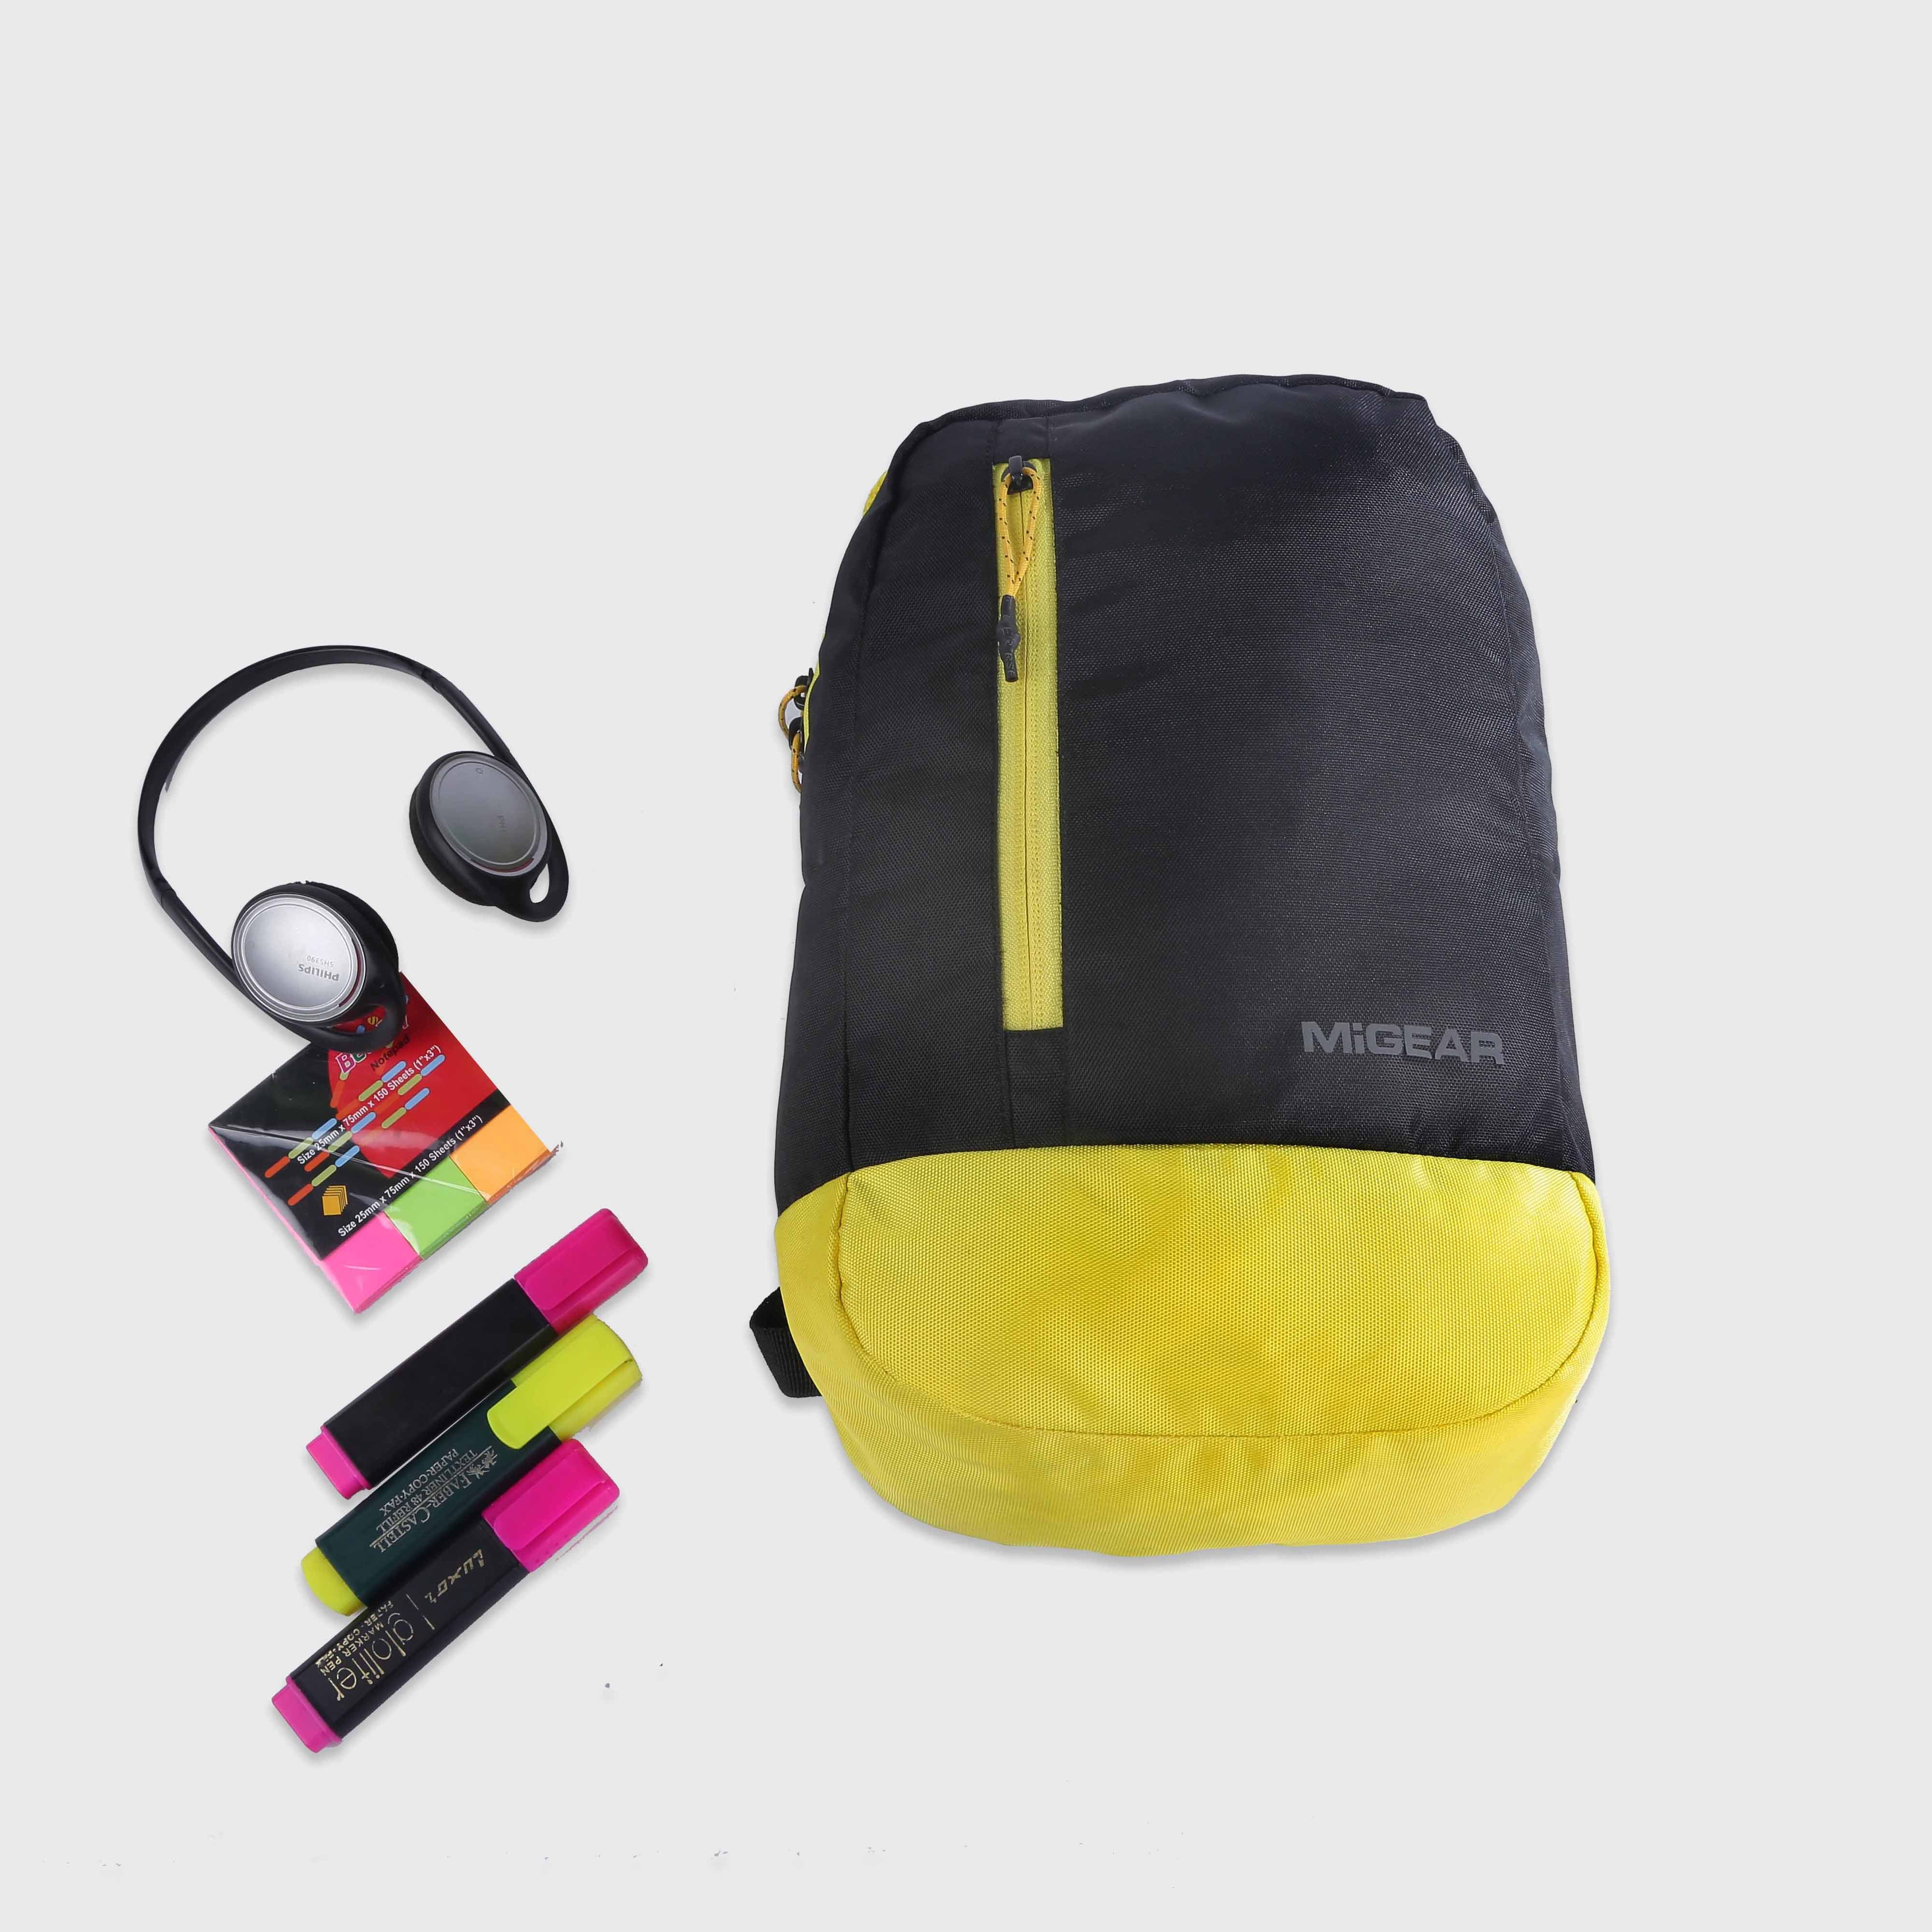 Bumble-Bee Cycling Backpack